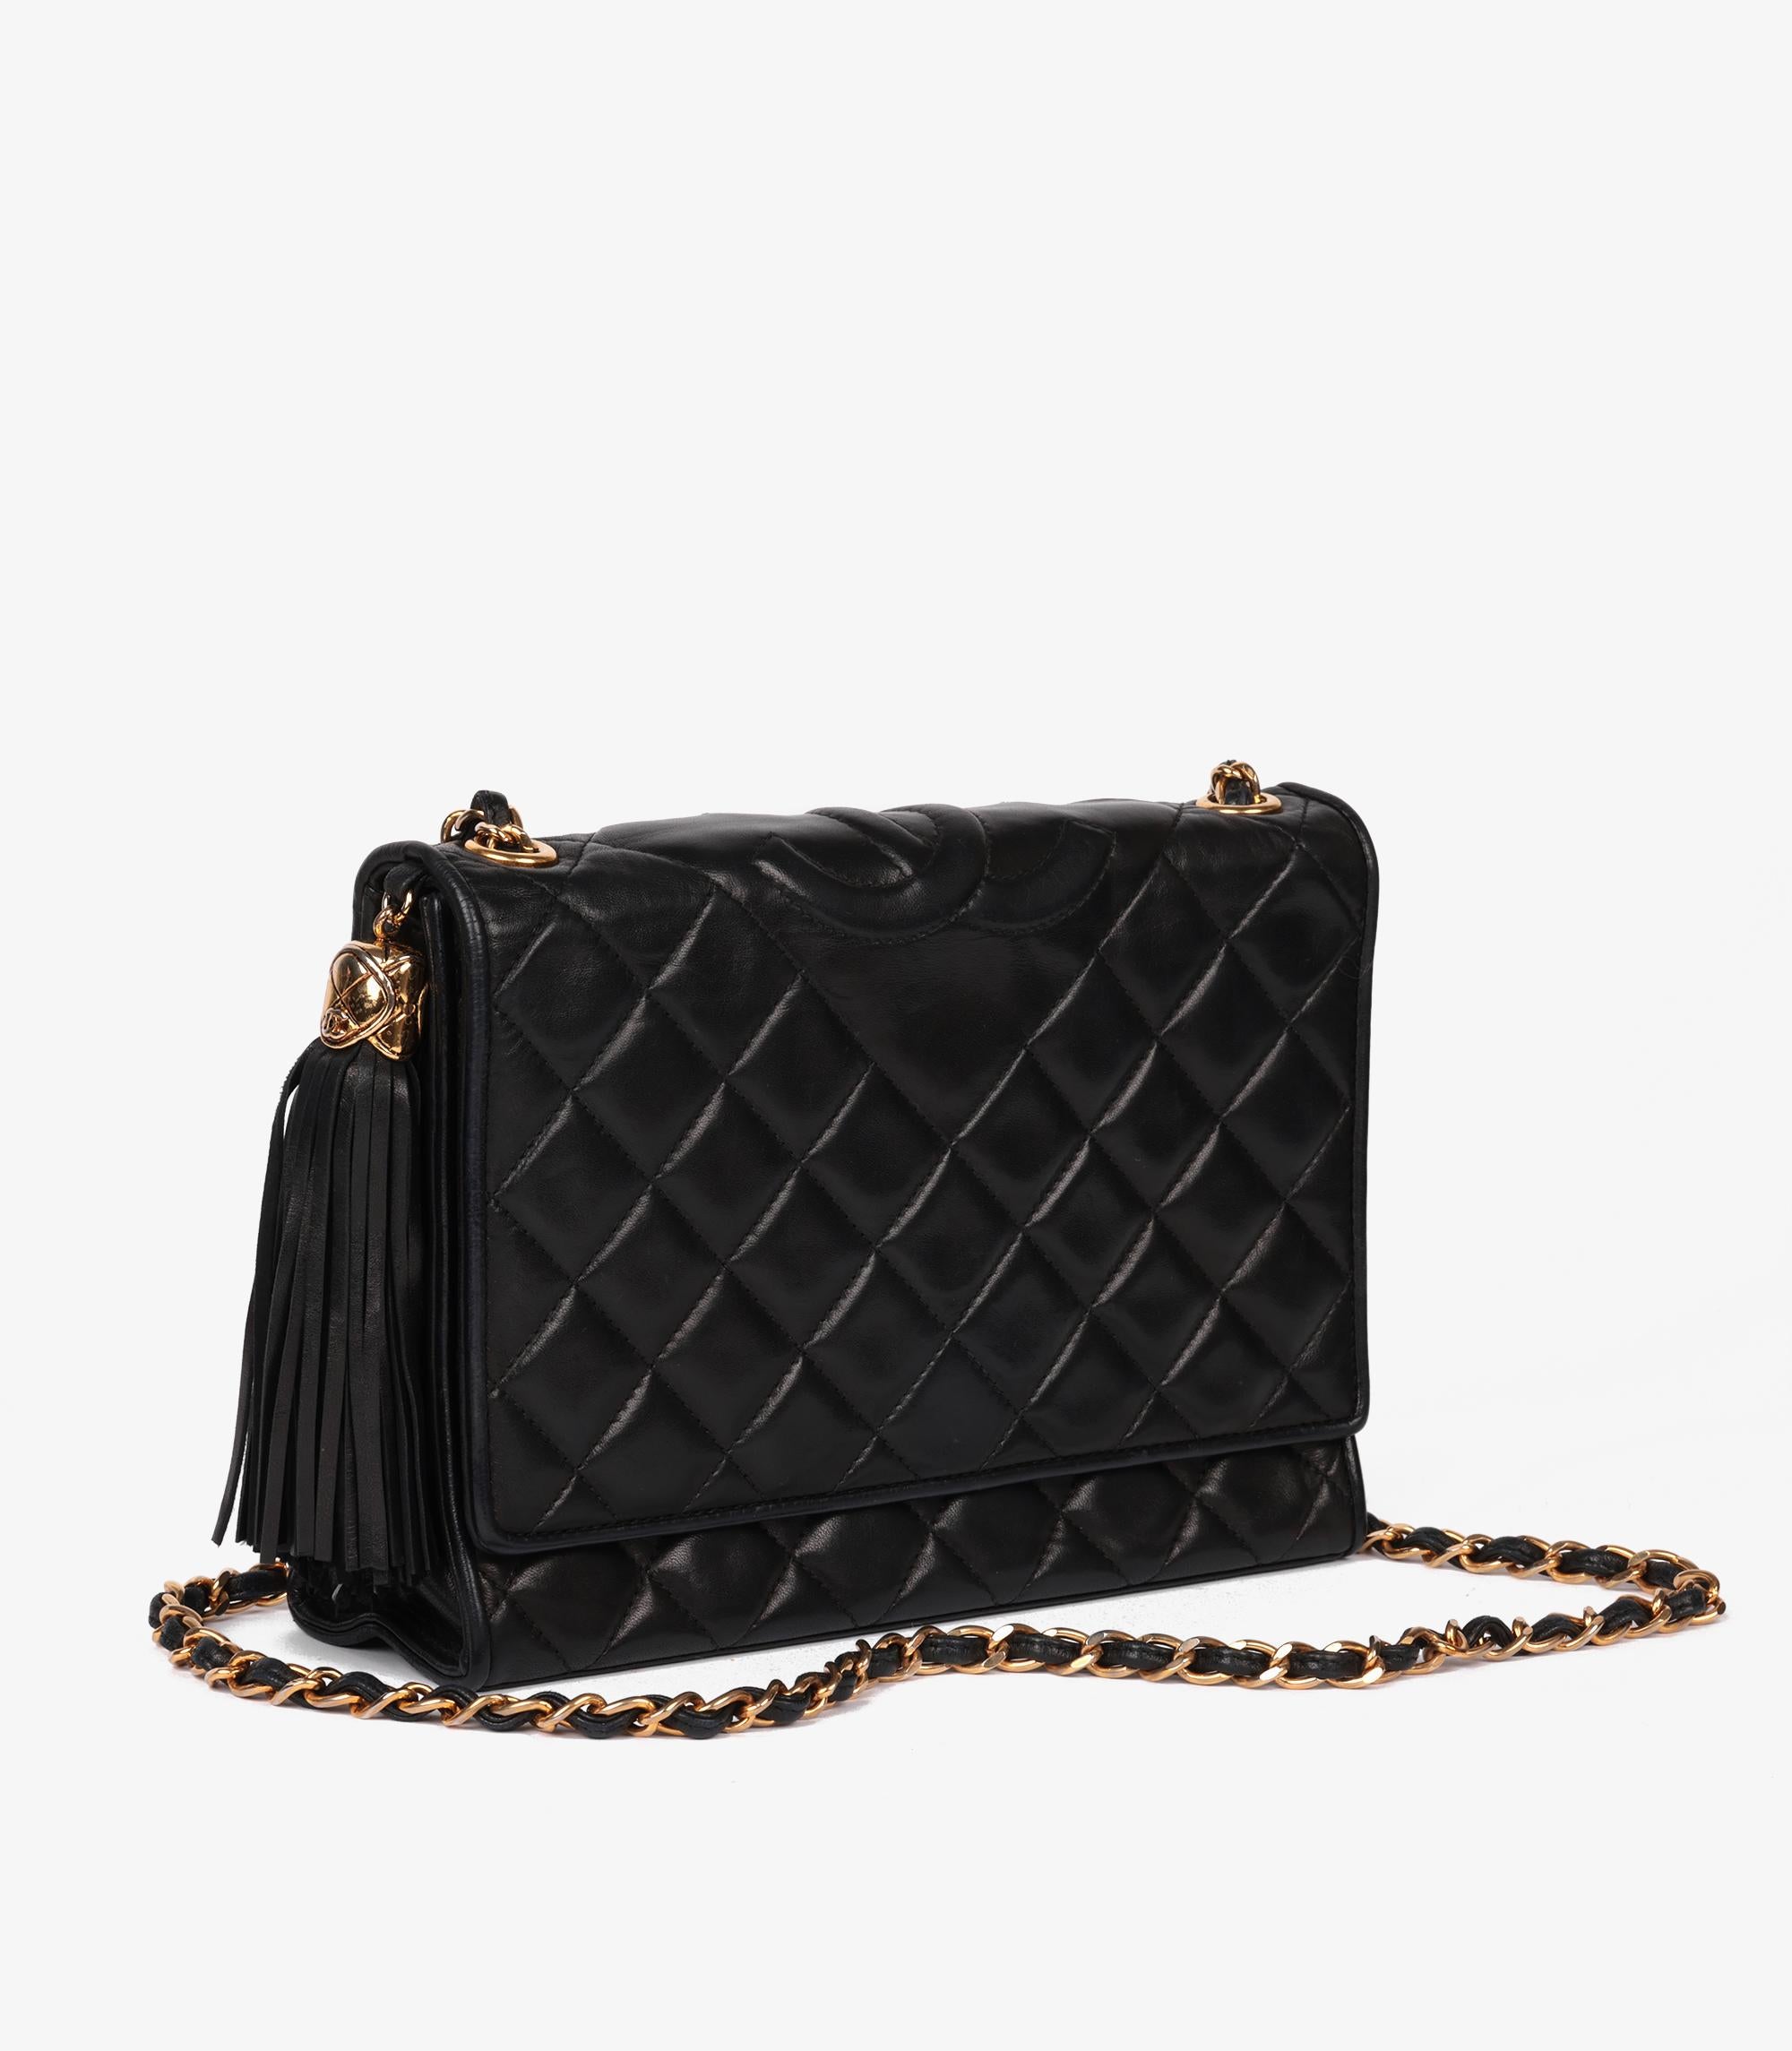 Brand- Chanel
Model- Small Fringe Timeless Single Flap Bag
Product Type- Shoulder
Serial Number- 15*****
Age- Circa 1989
Accompanied By- Authenticity Card
Colour- Black
Hardware- Gold
Material(s)- Lambskin Leather

Condition